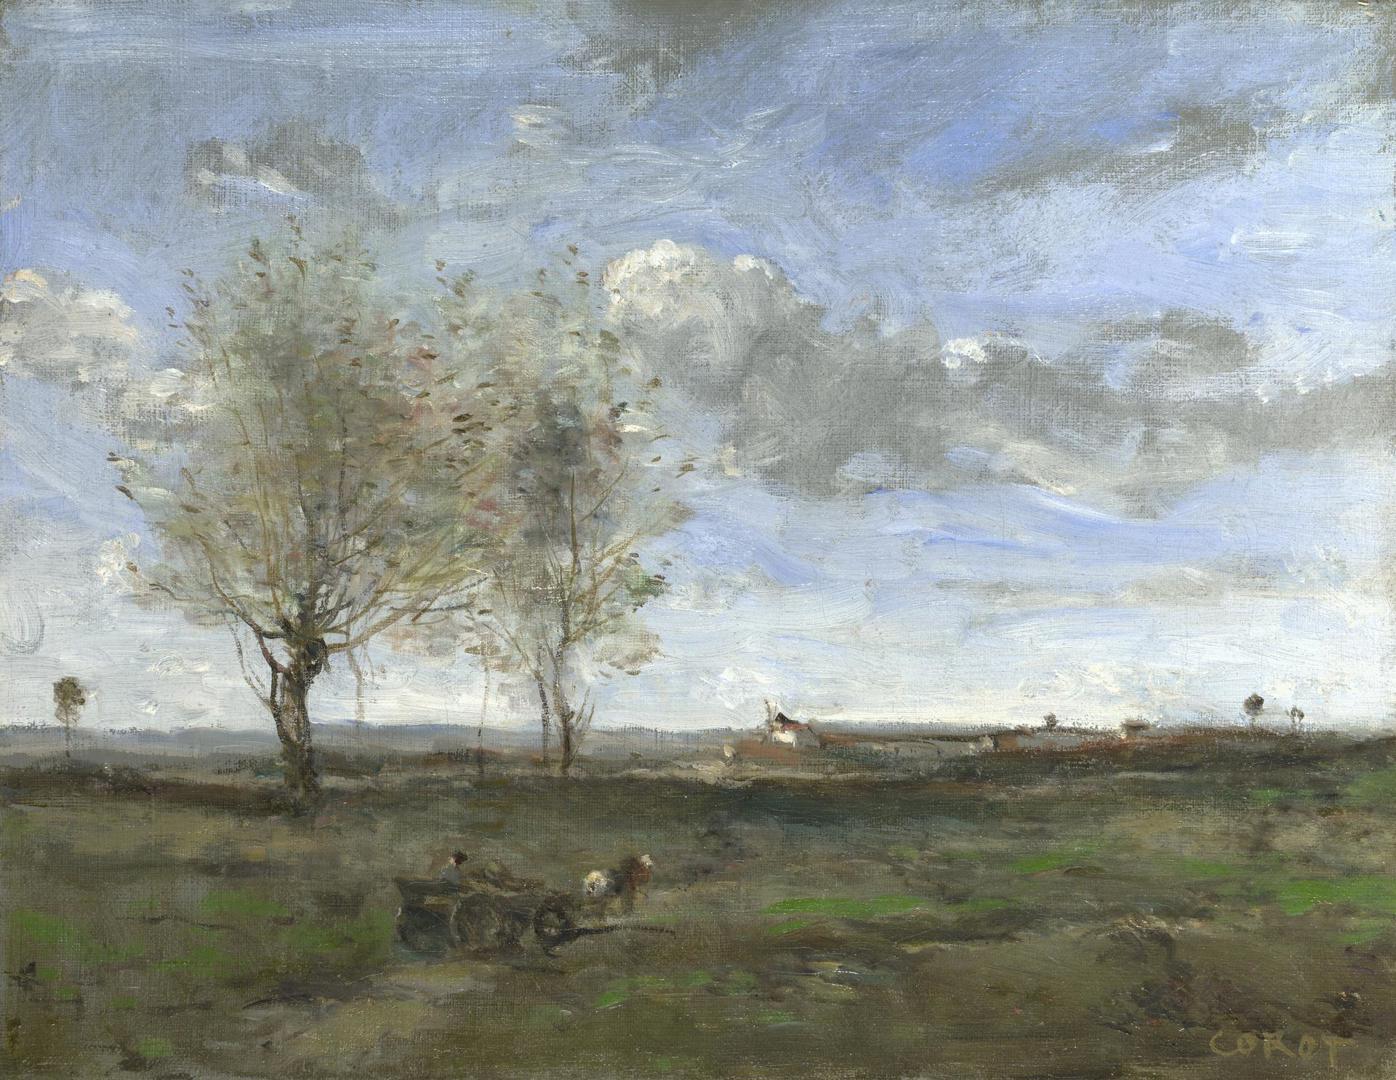 A Wagon in the Plains of Artois by Jean-Baptiste-Camille Corot